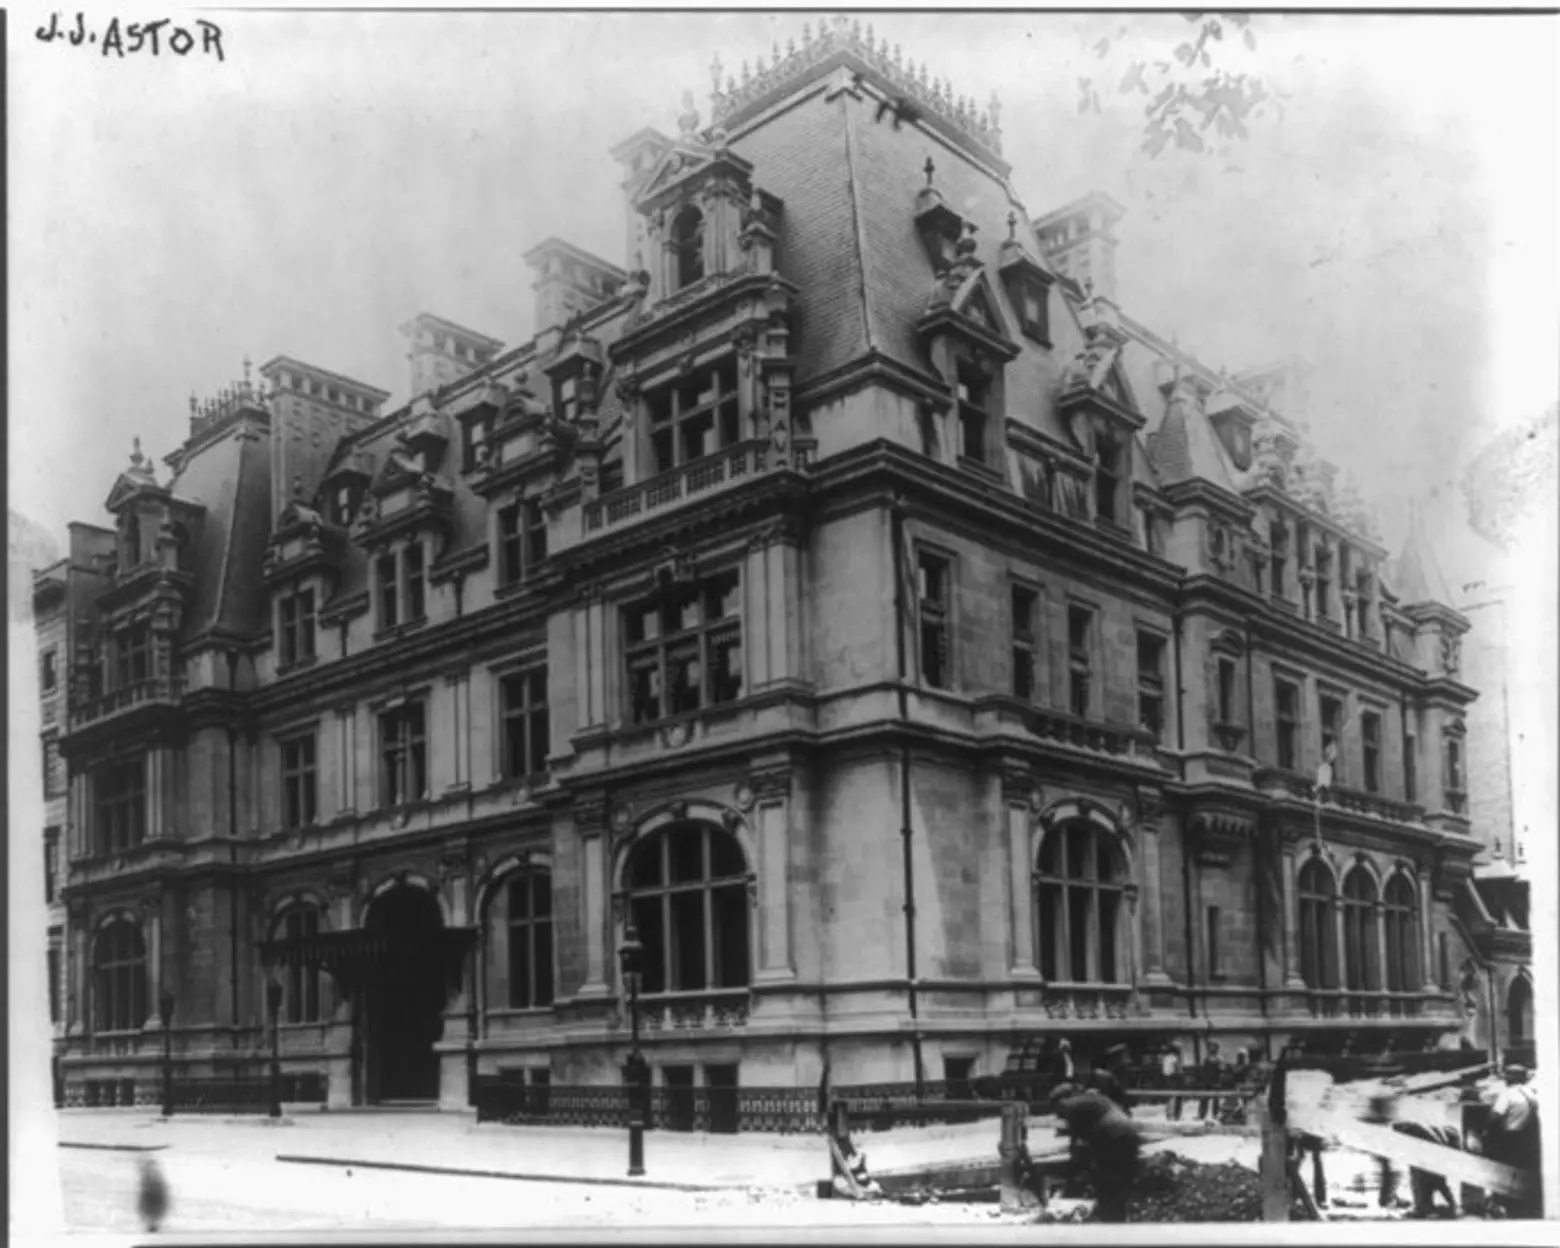 Fifth Avenue 1900: NYC's Gilded Age Showcased in Architecture